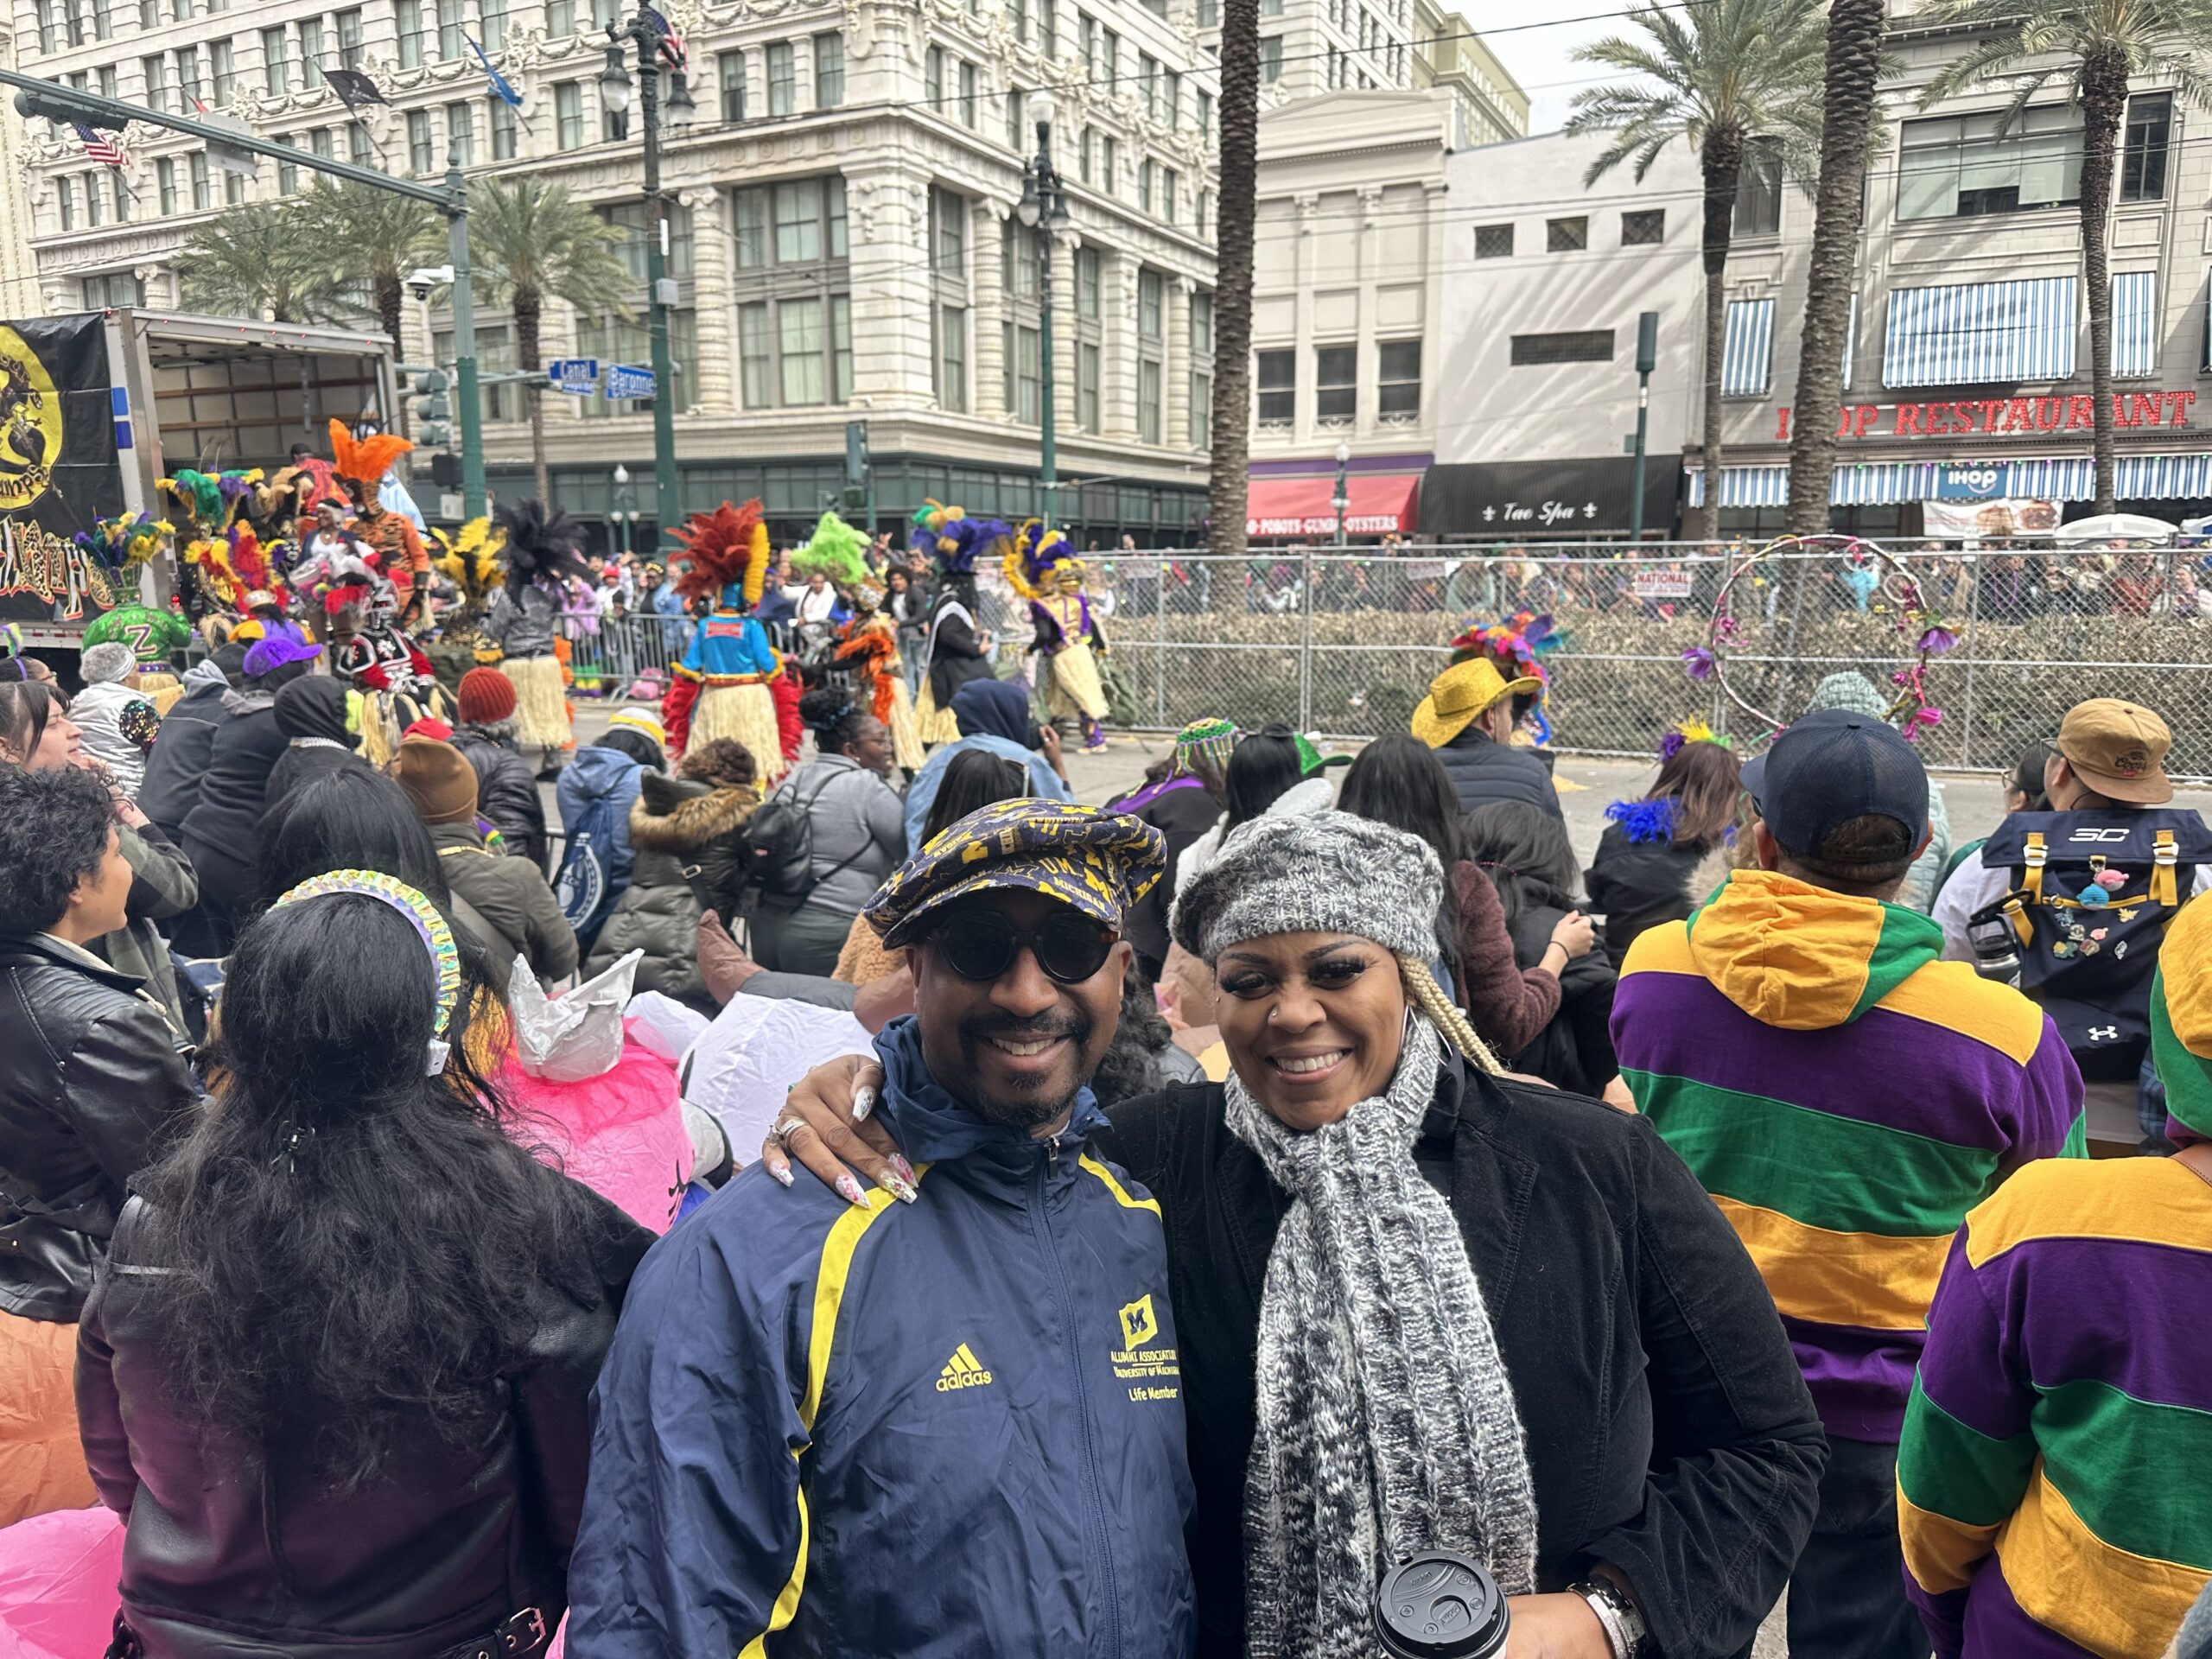 Rodney Johnson, ’91, and his wife, LaShawn, celebrated Mardi Gras in New Orleans by mixing a bit of Maize and Blue into the festivities.